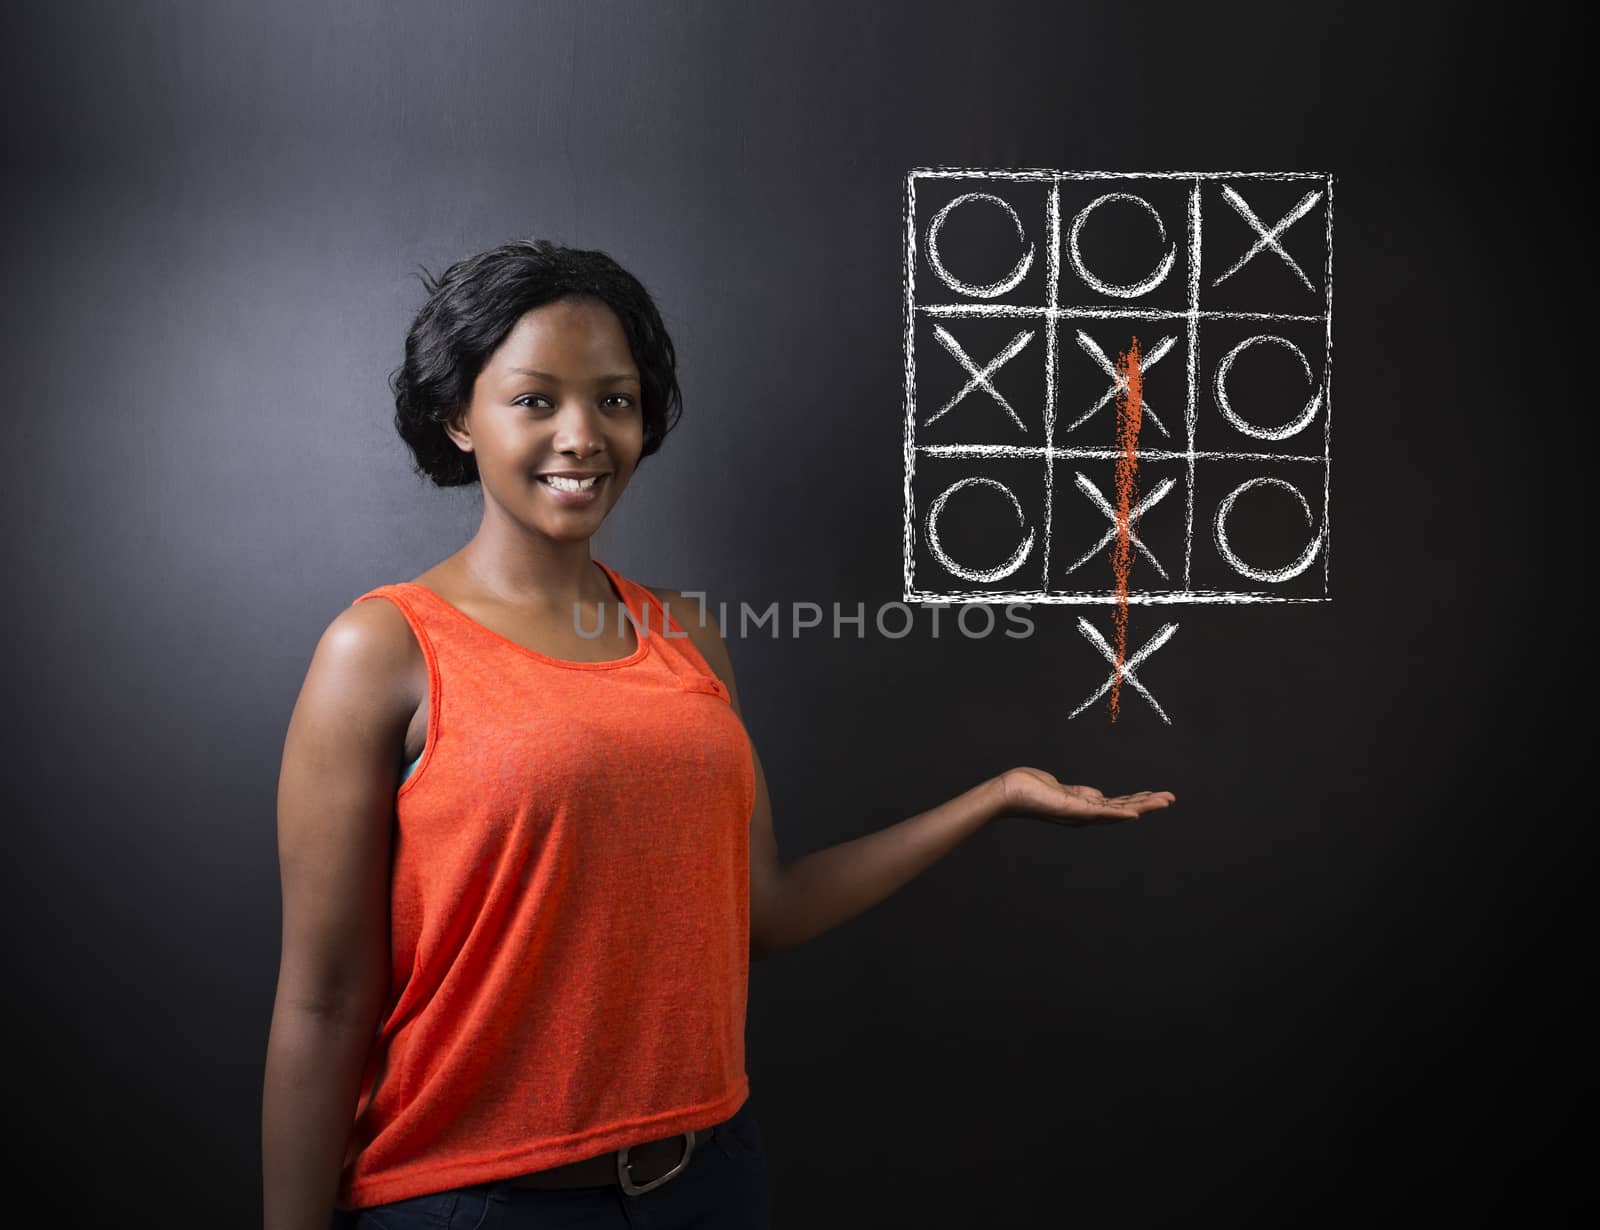 Thinking out of the box South African or African American woman teacher or student tic tac toe on blackboard background